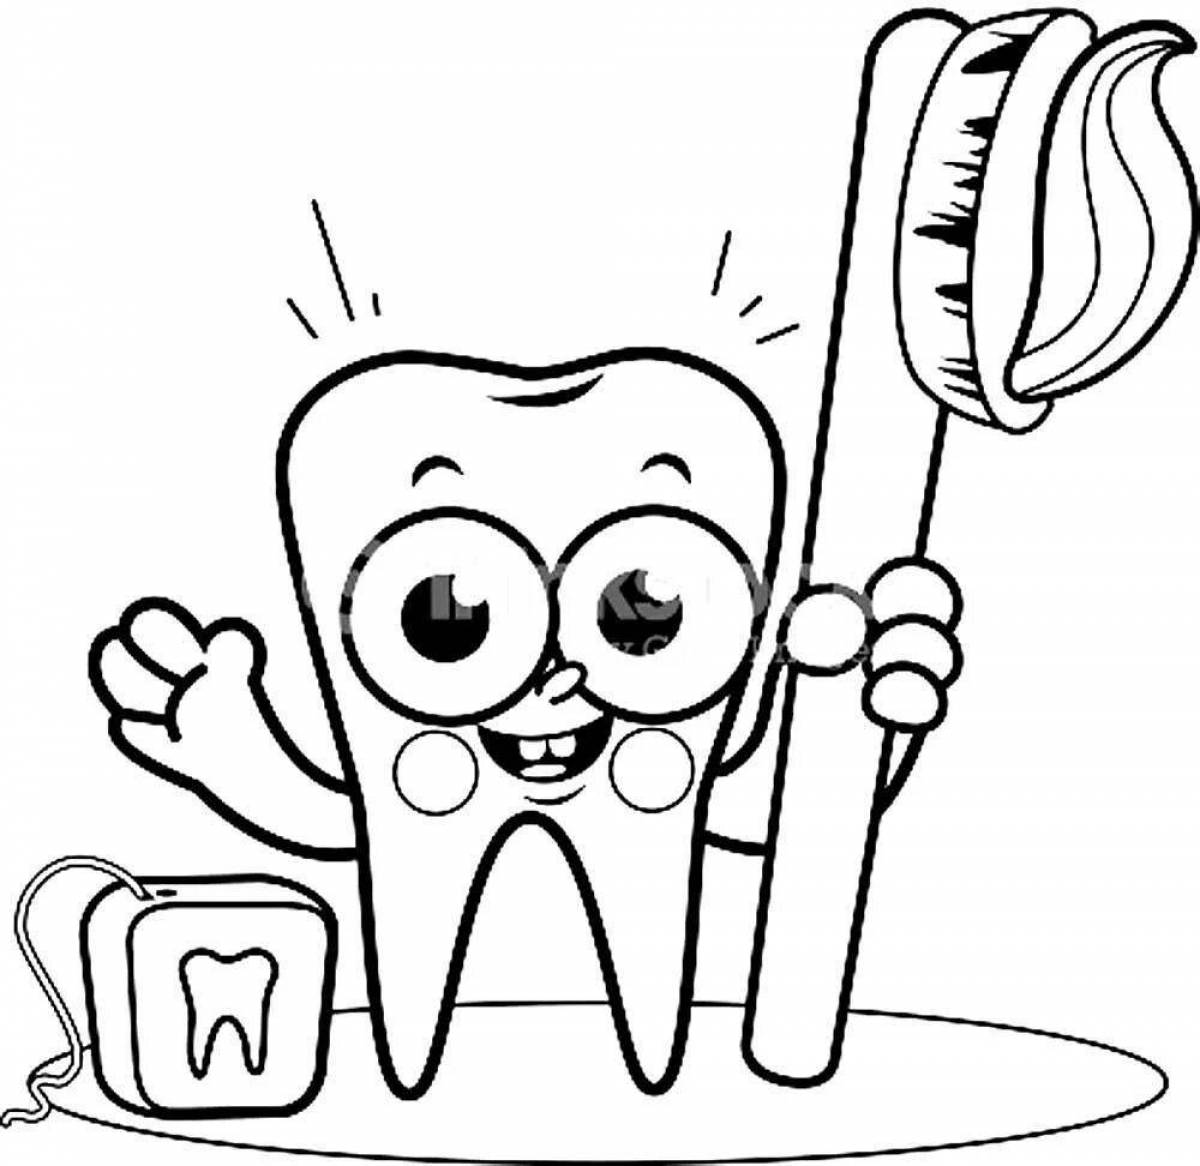 Playful brush your teeth coloring page